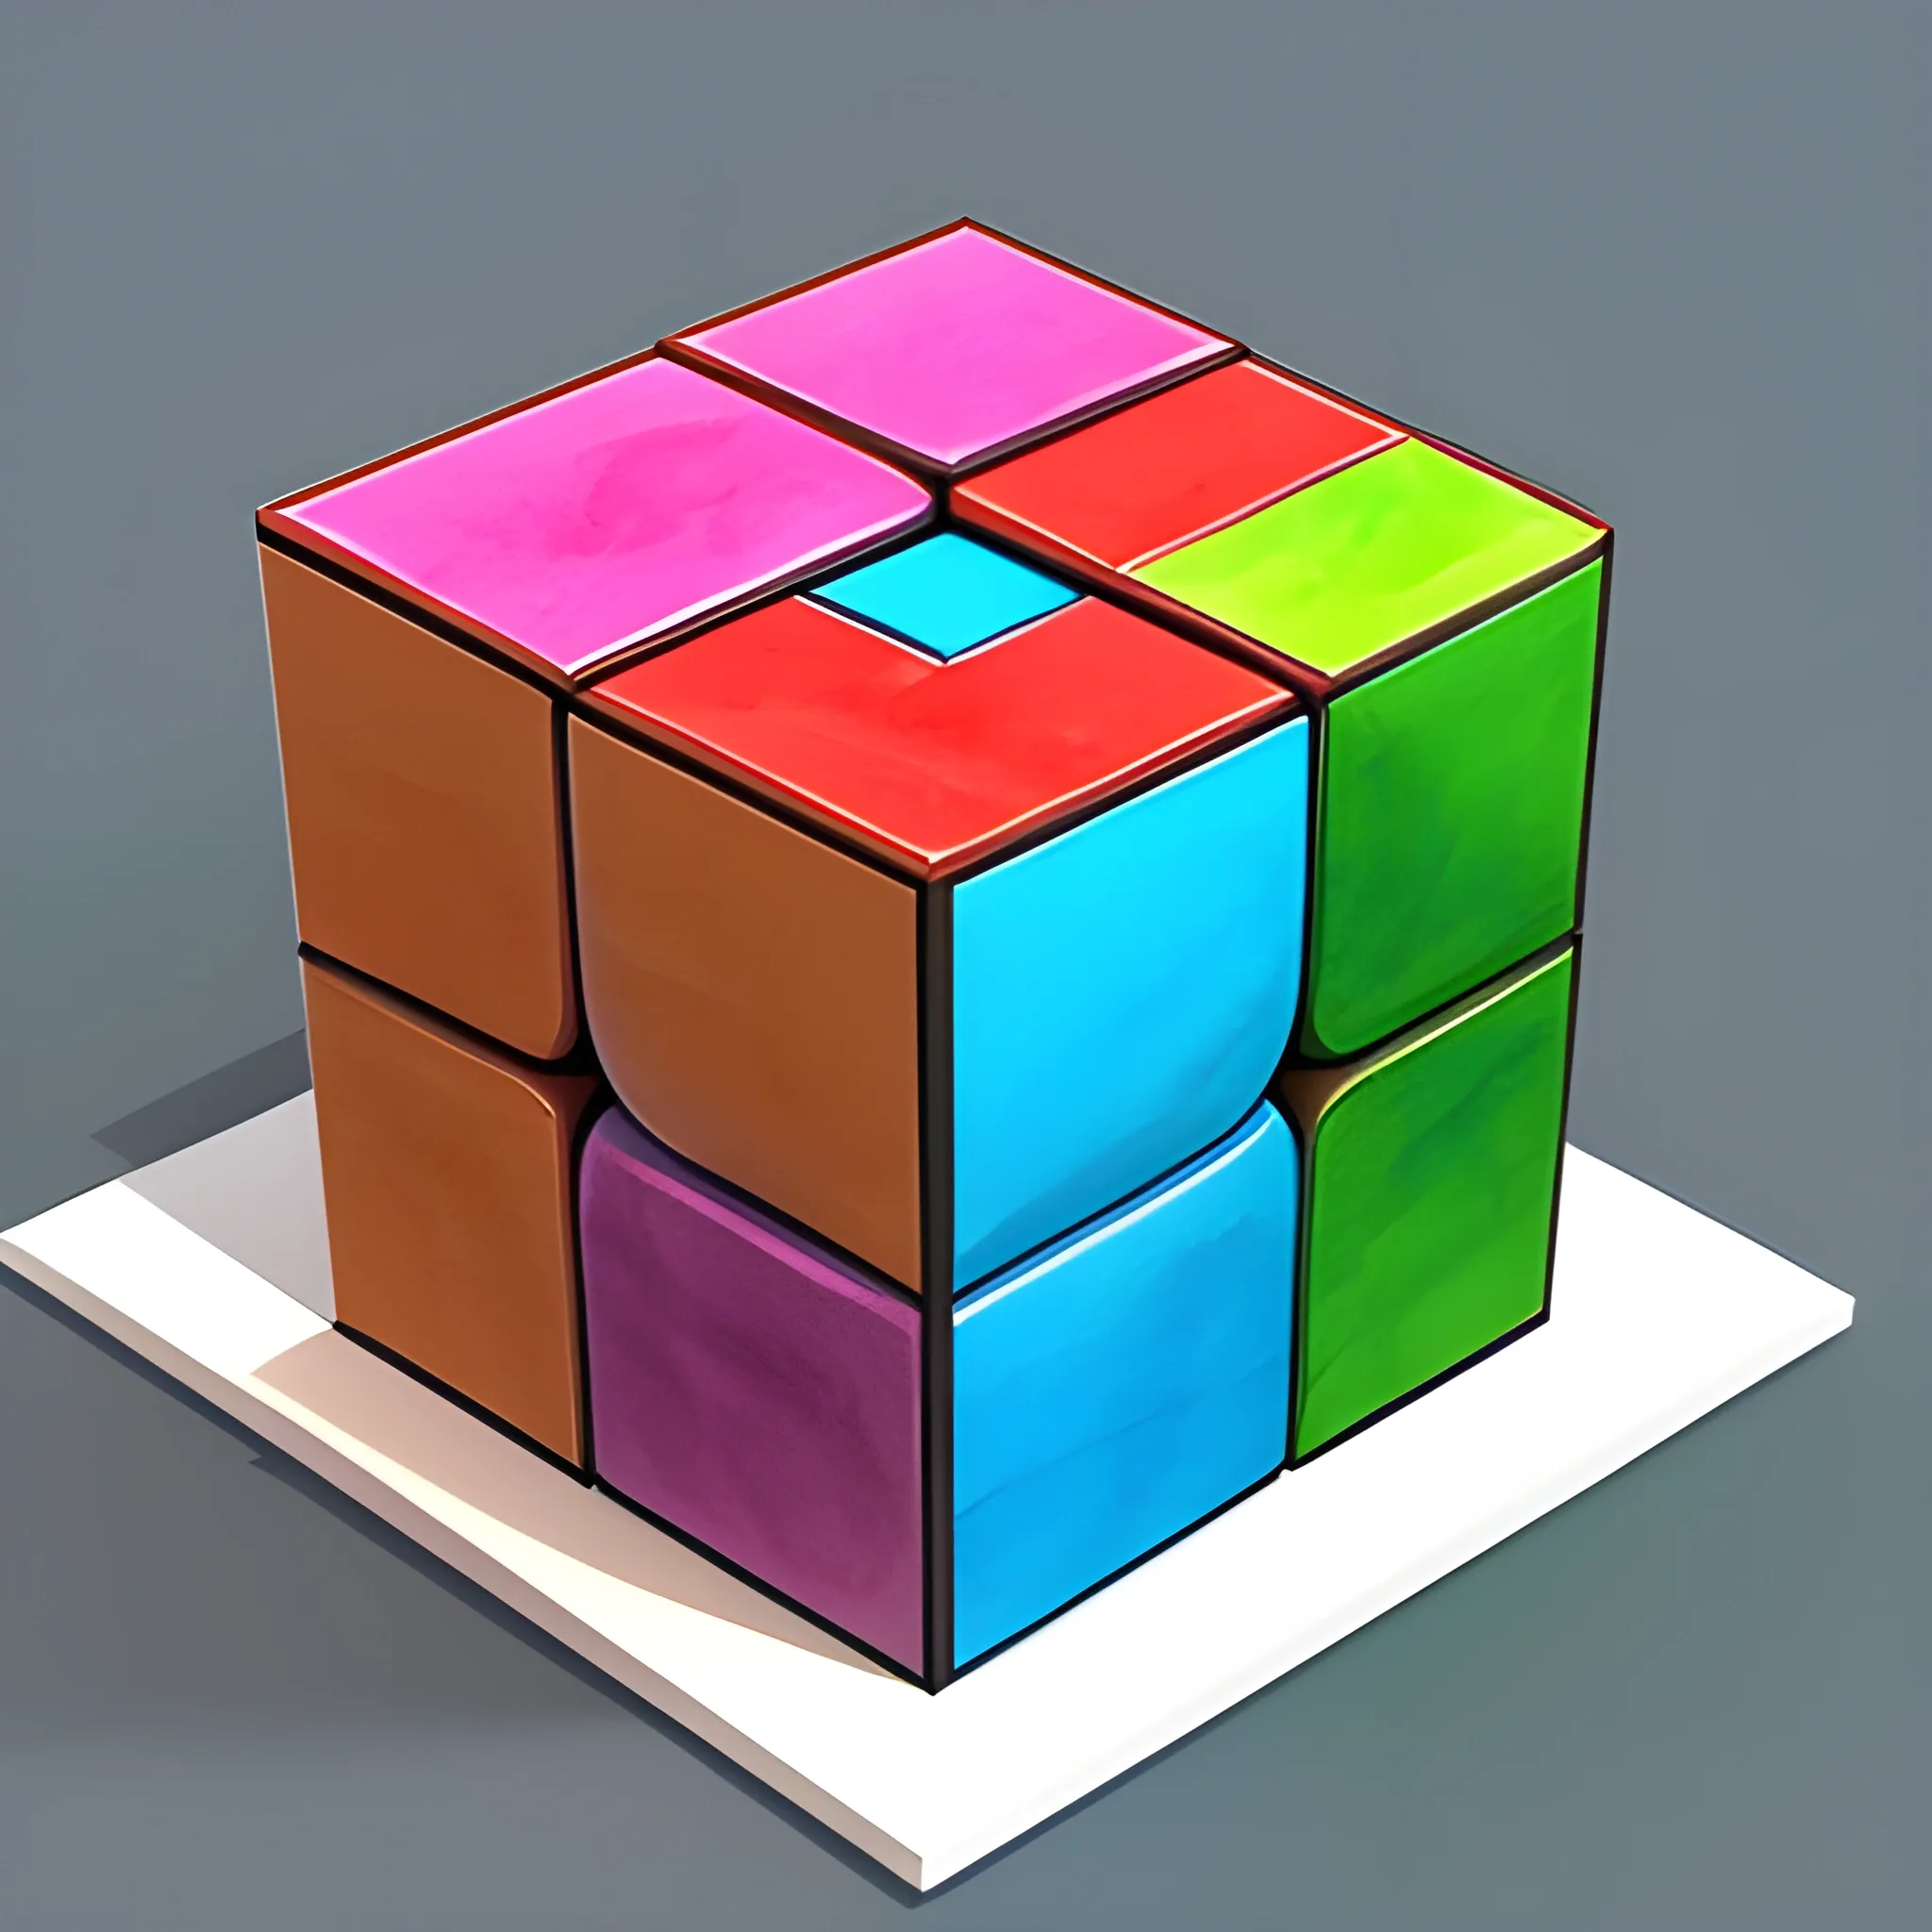 make a minimalist cube , 3D, Water Color